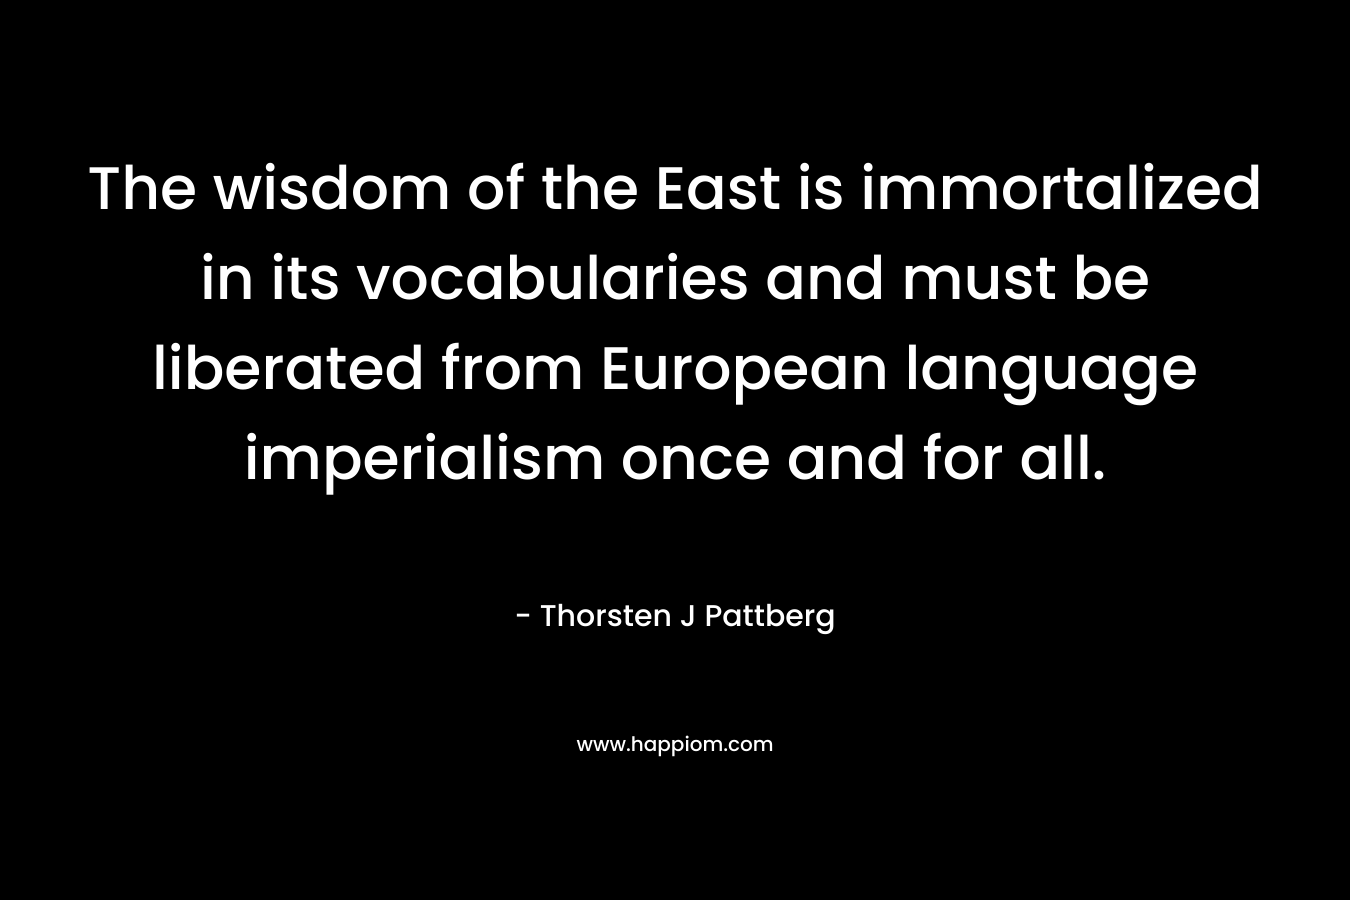 The wisdom of the East is immortalized in its vocabularies and must be liberated from European language imperialism once and for all. – Thorsten J Pattberg